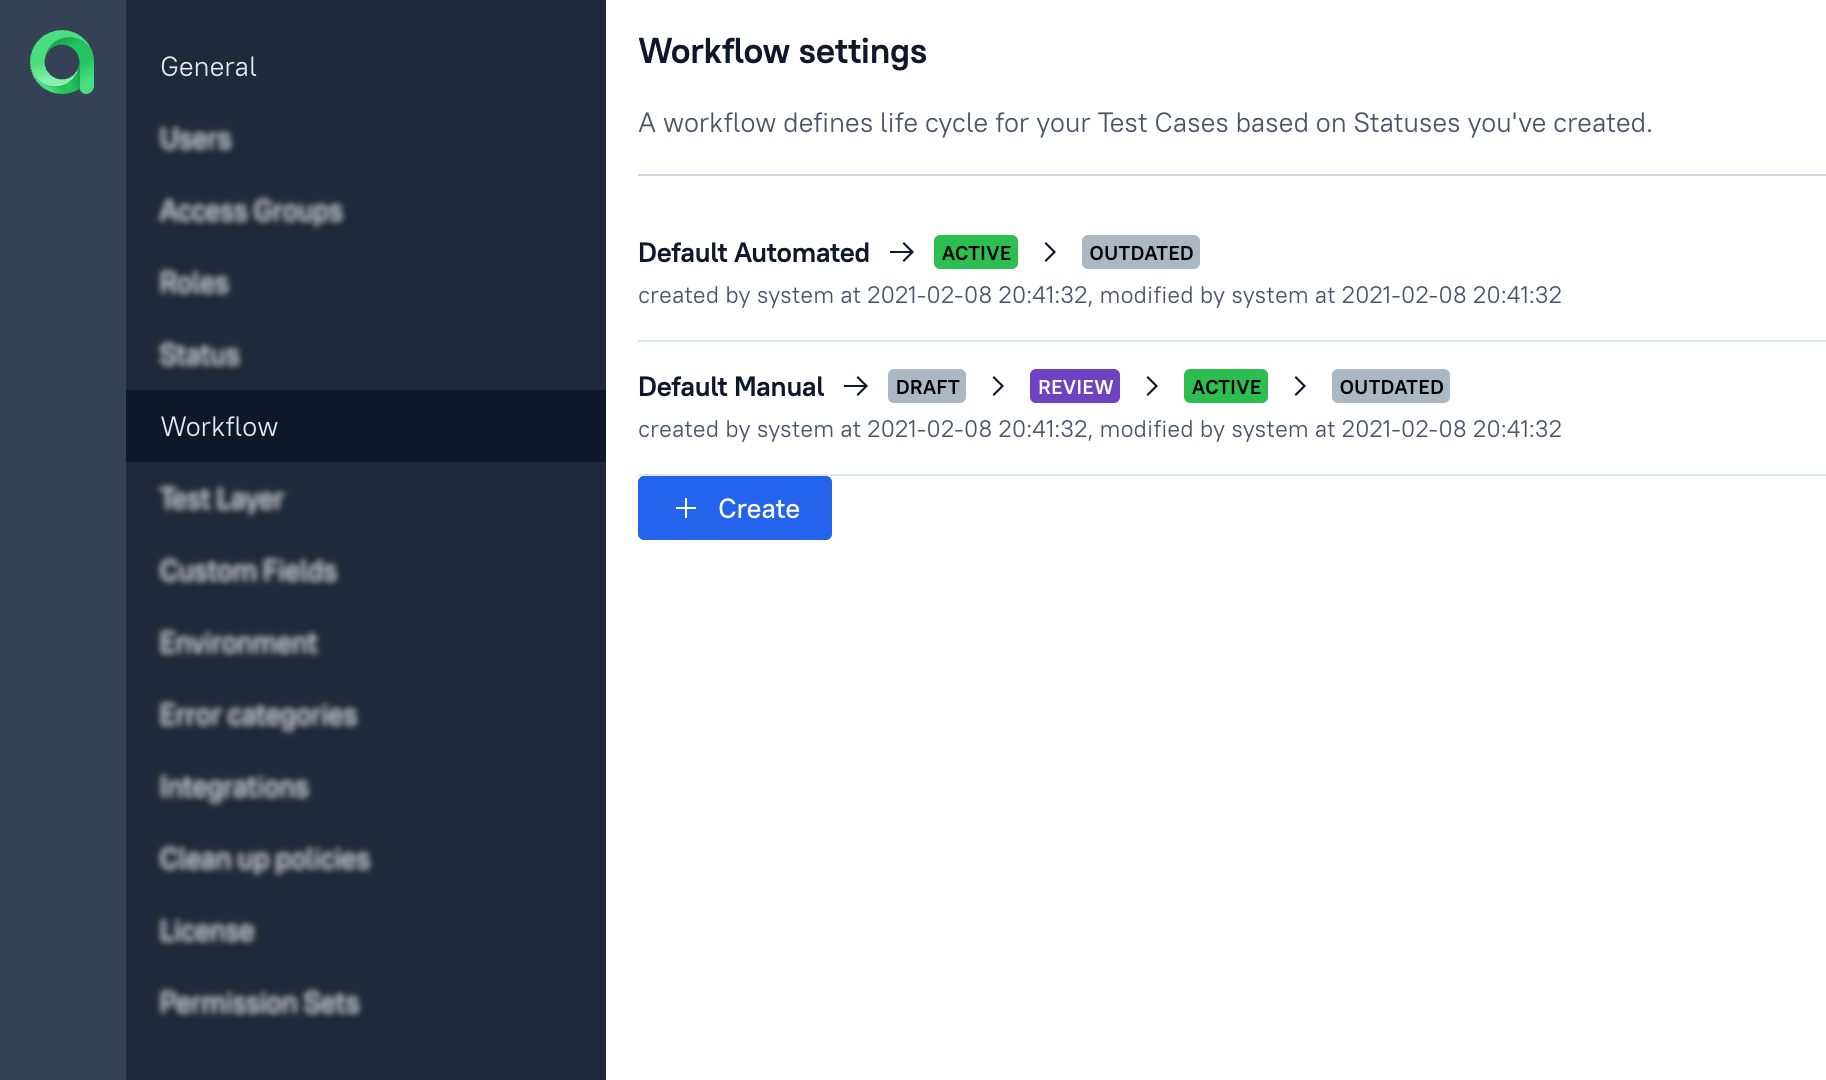 Available workflows